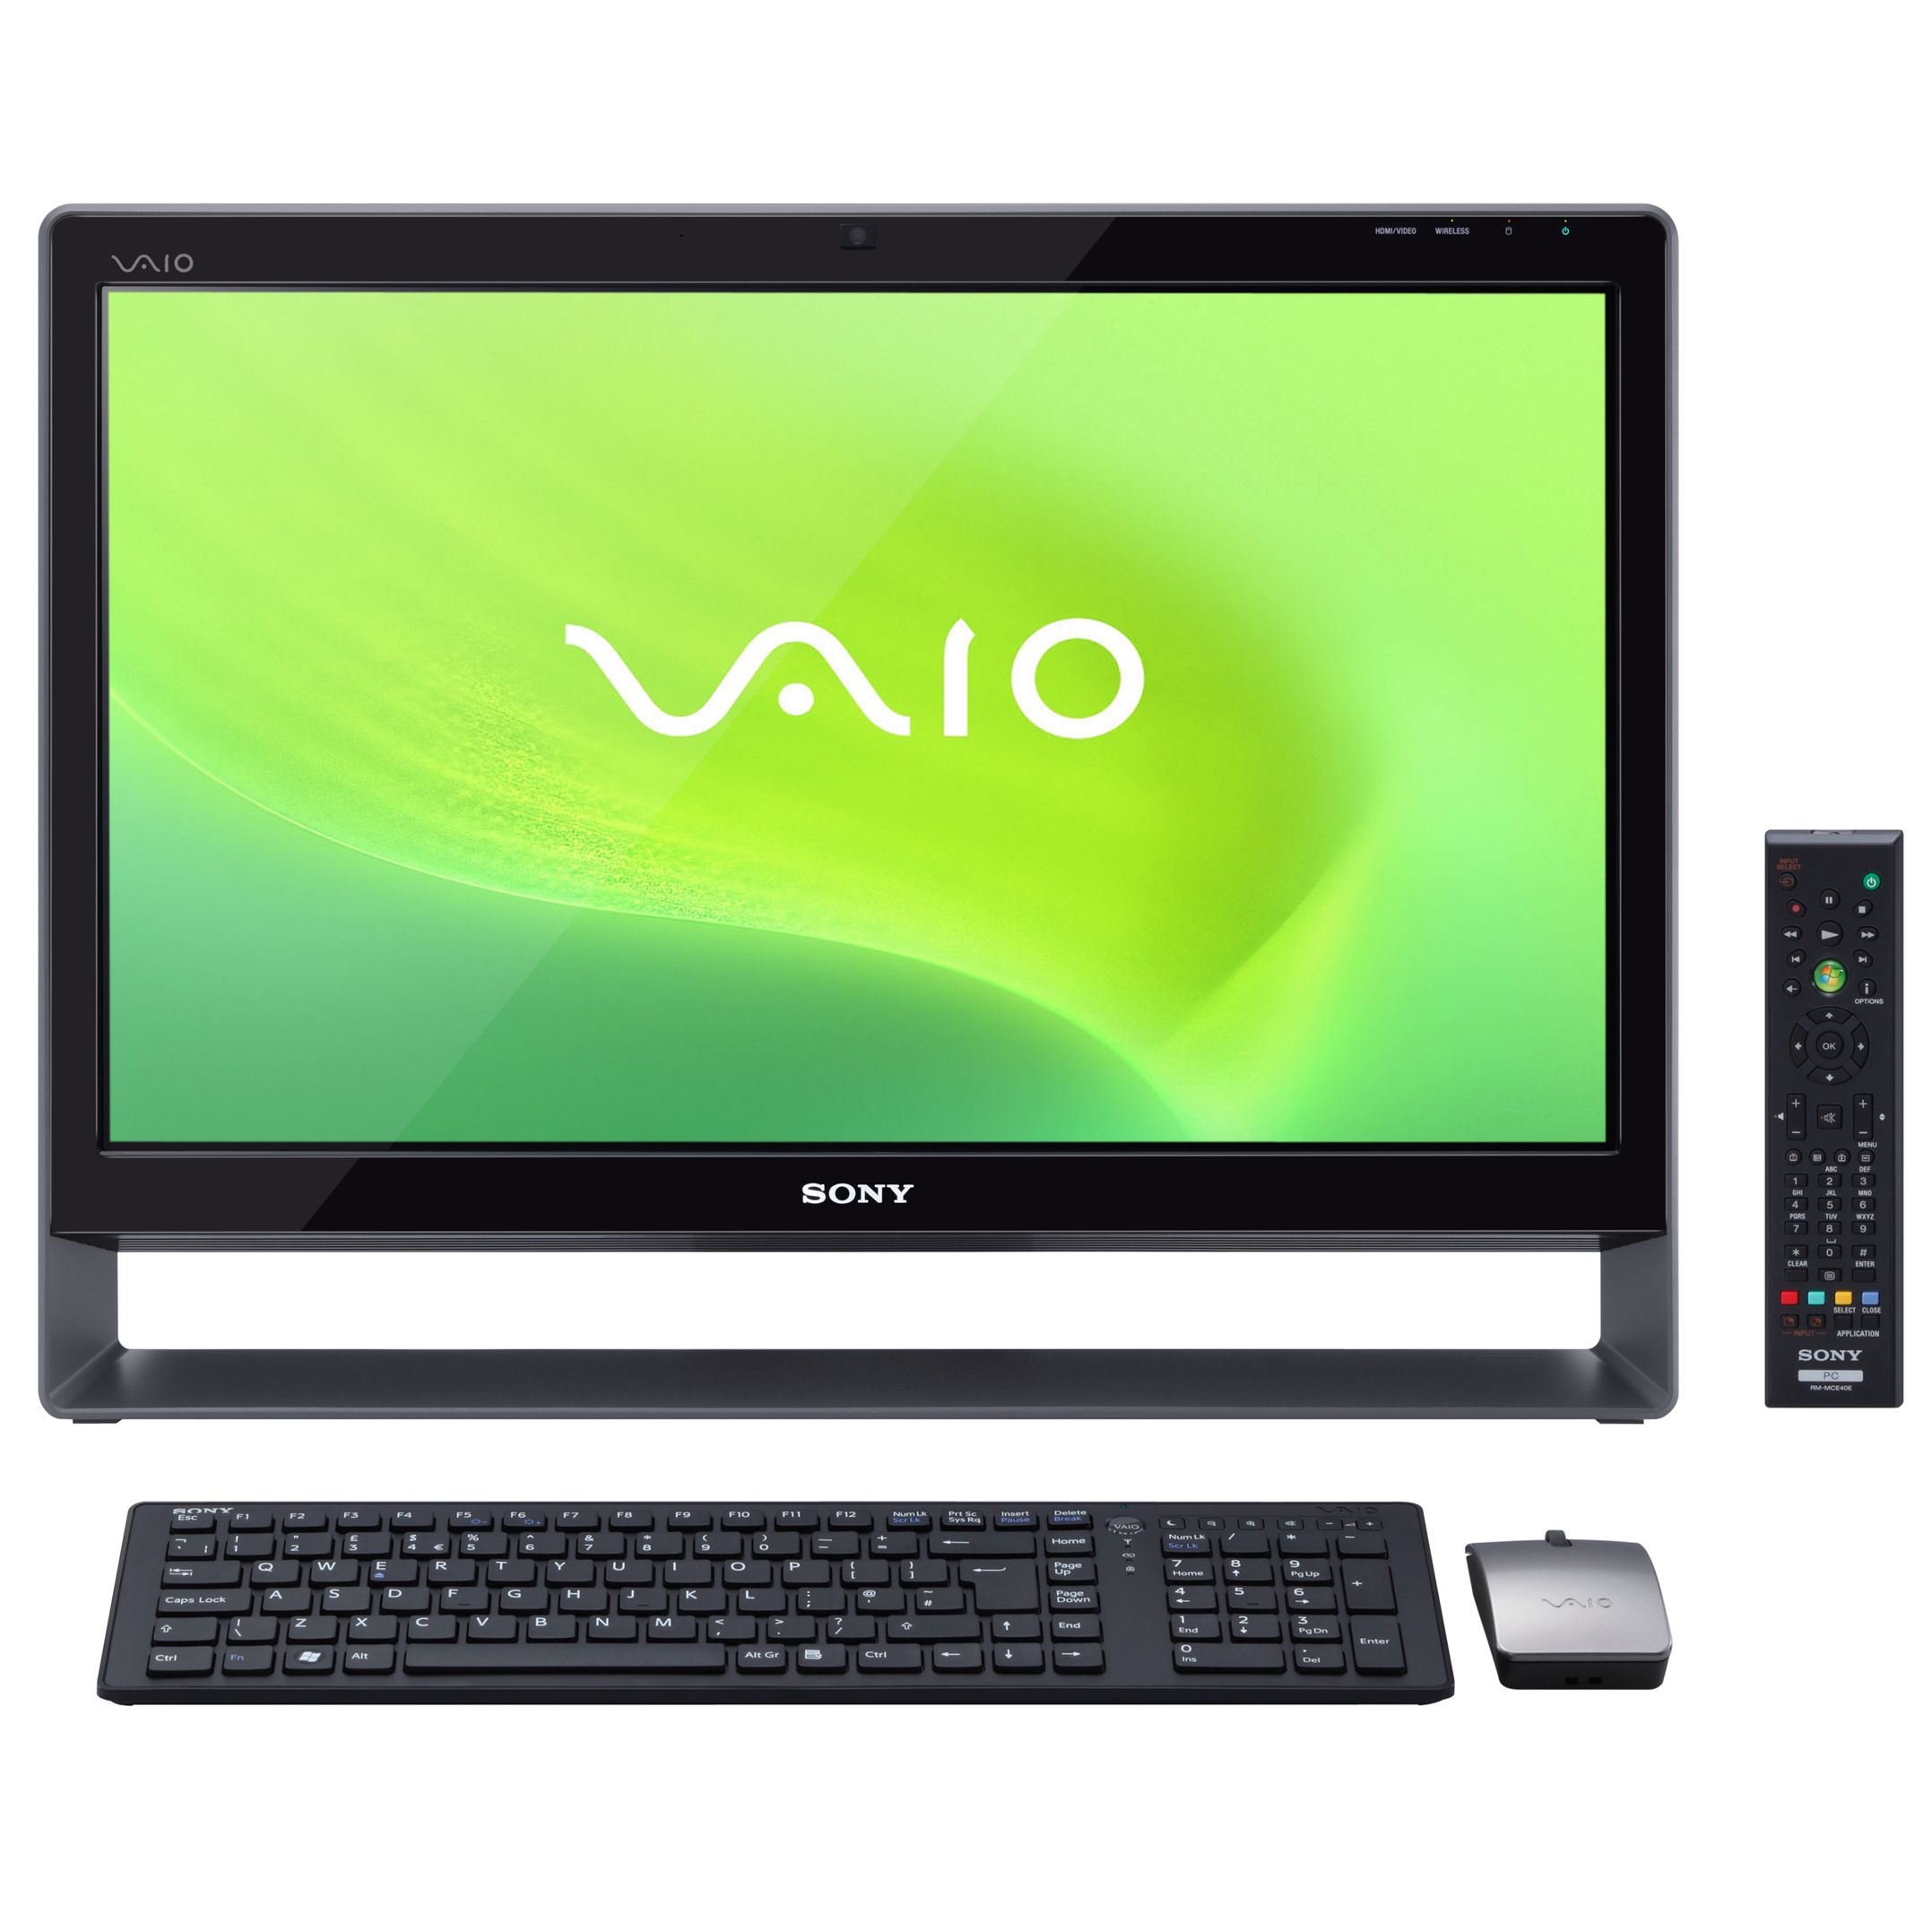 Sony Vaio VPC-L14S1E/S Desktop PC with 24 Inch Screen at John Lewis